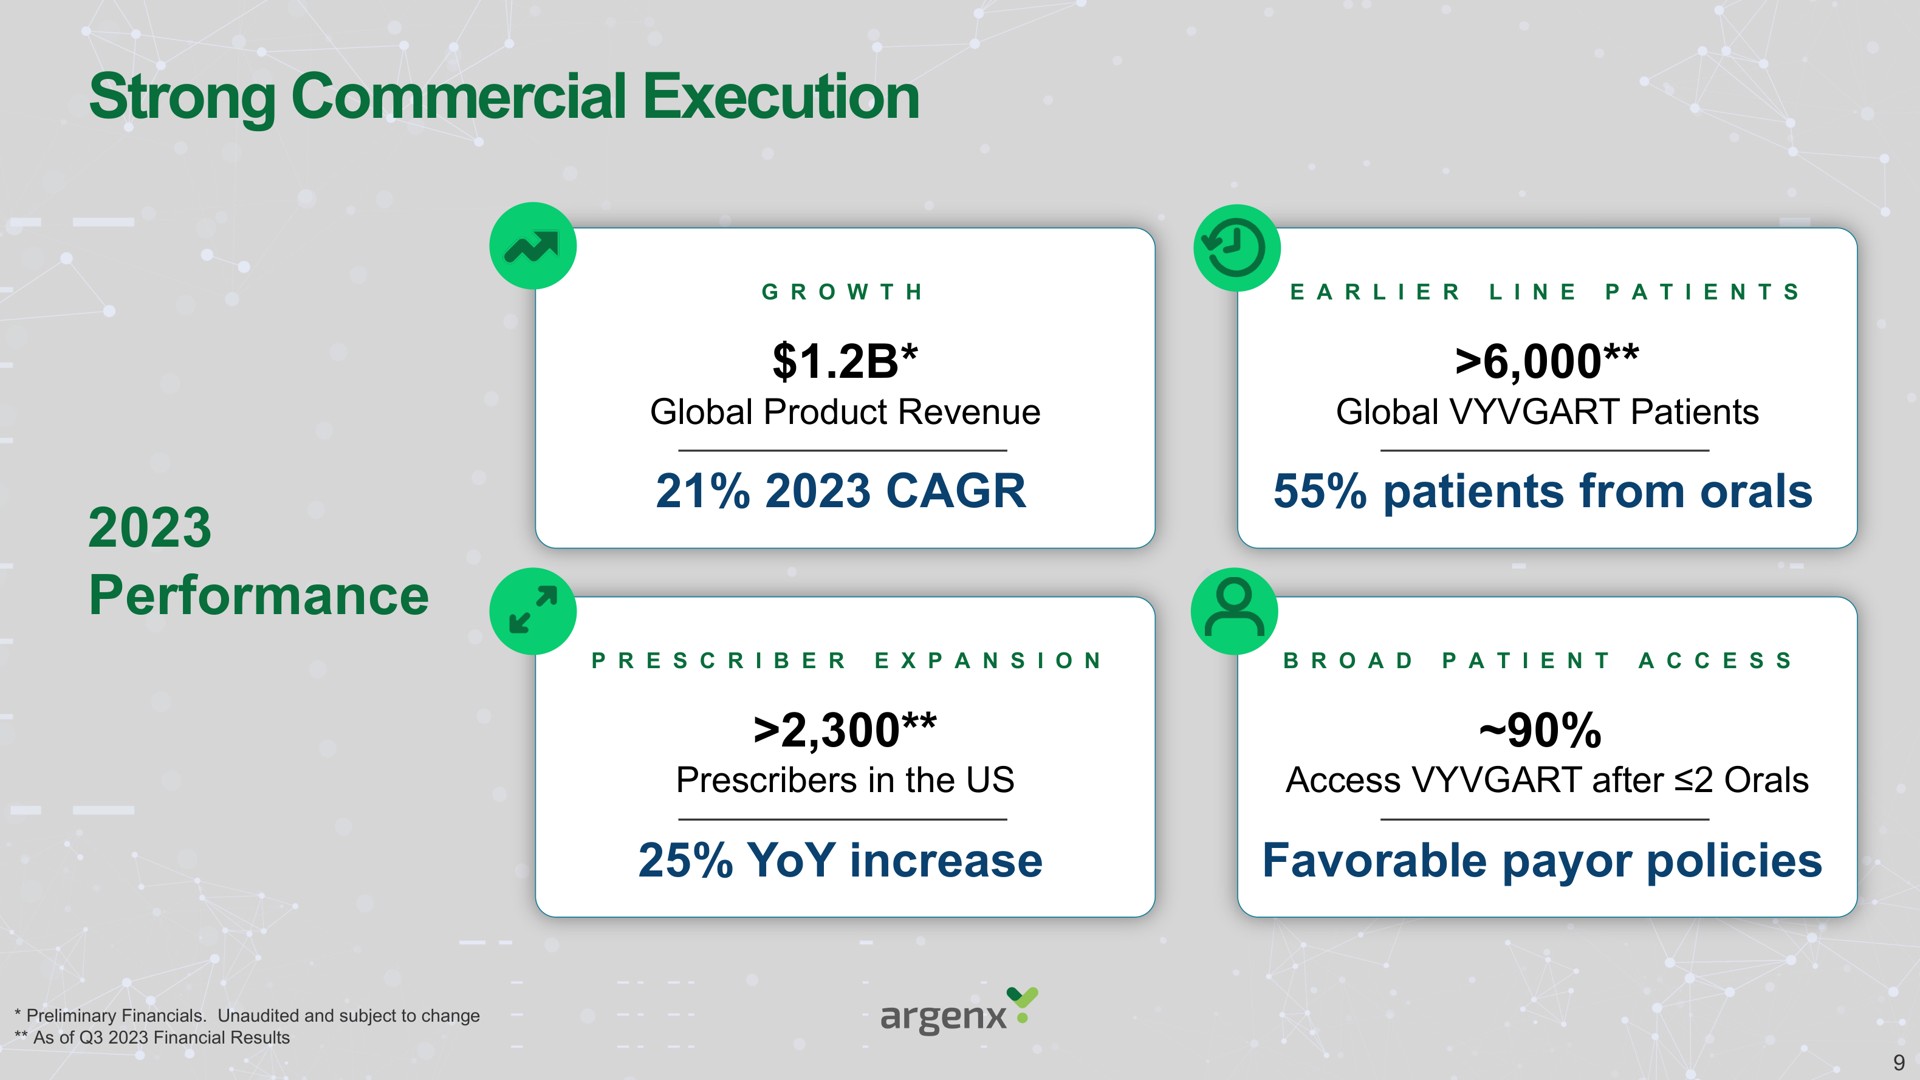 strong commercial execution | argenx SE